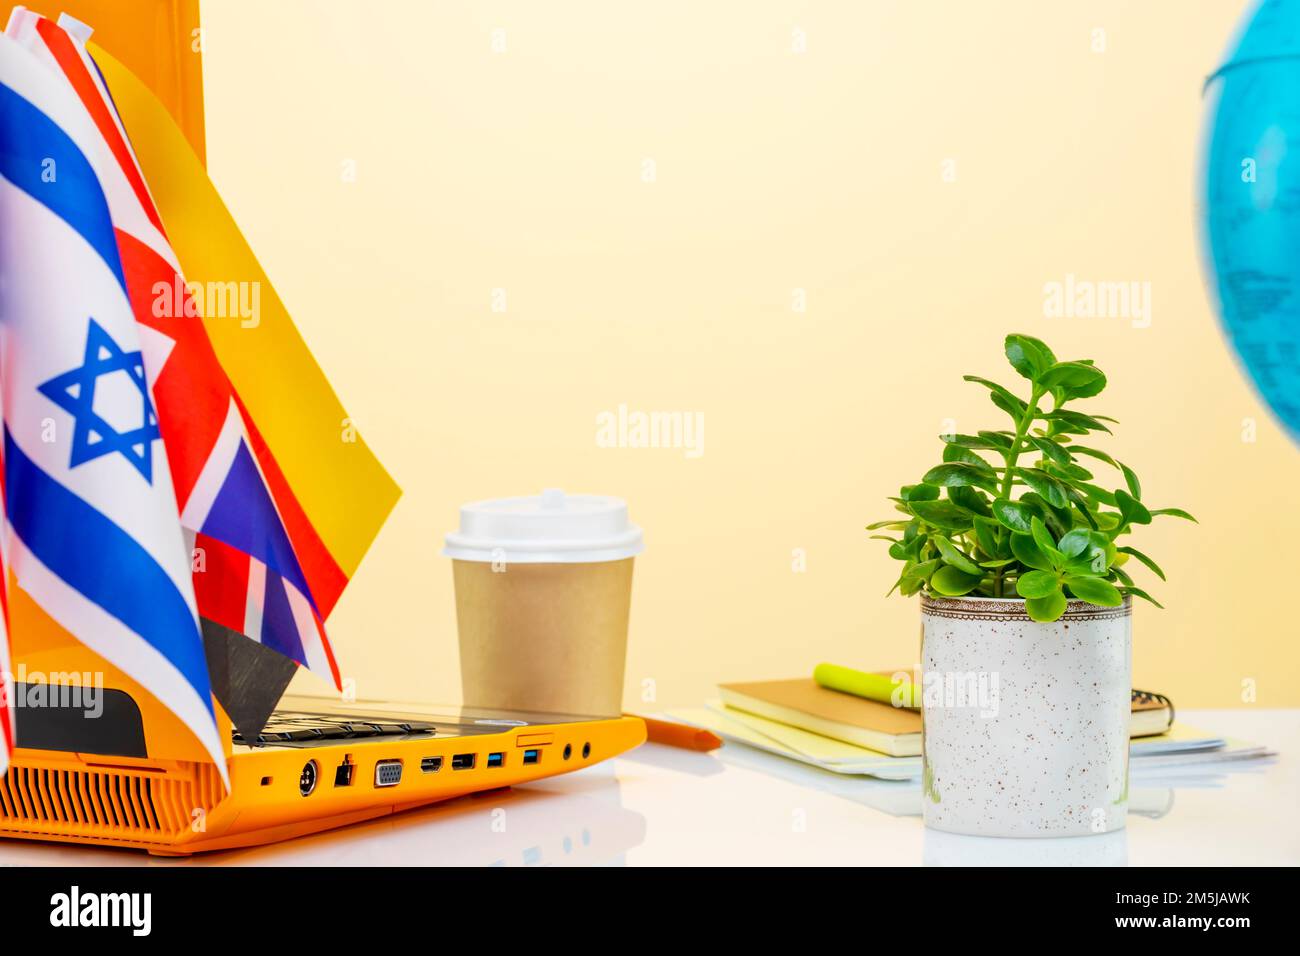 International online education. Laptop, notebooks, a globe, a cup of coffee and flags of different country on a beige background with copy space. Conc Stock Photo